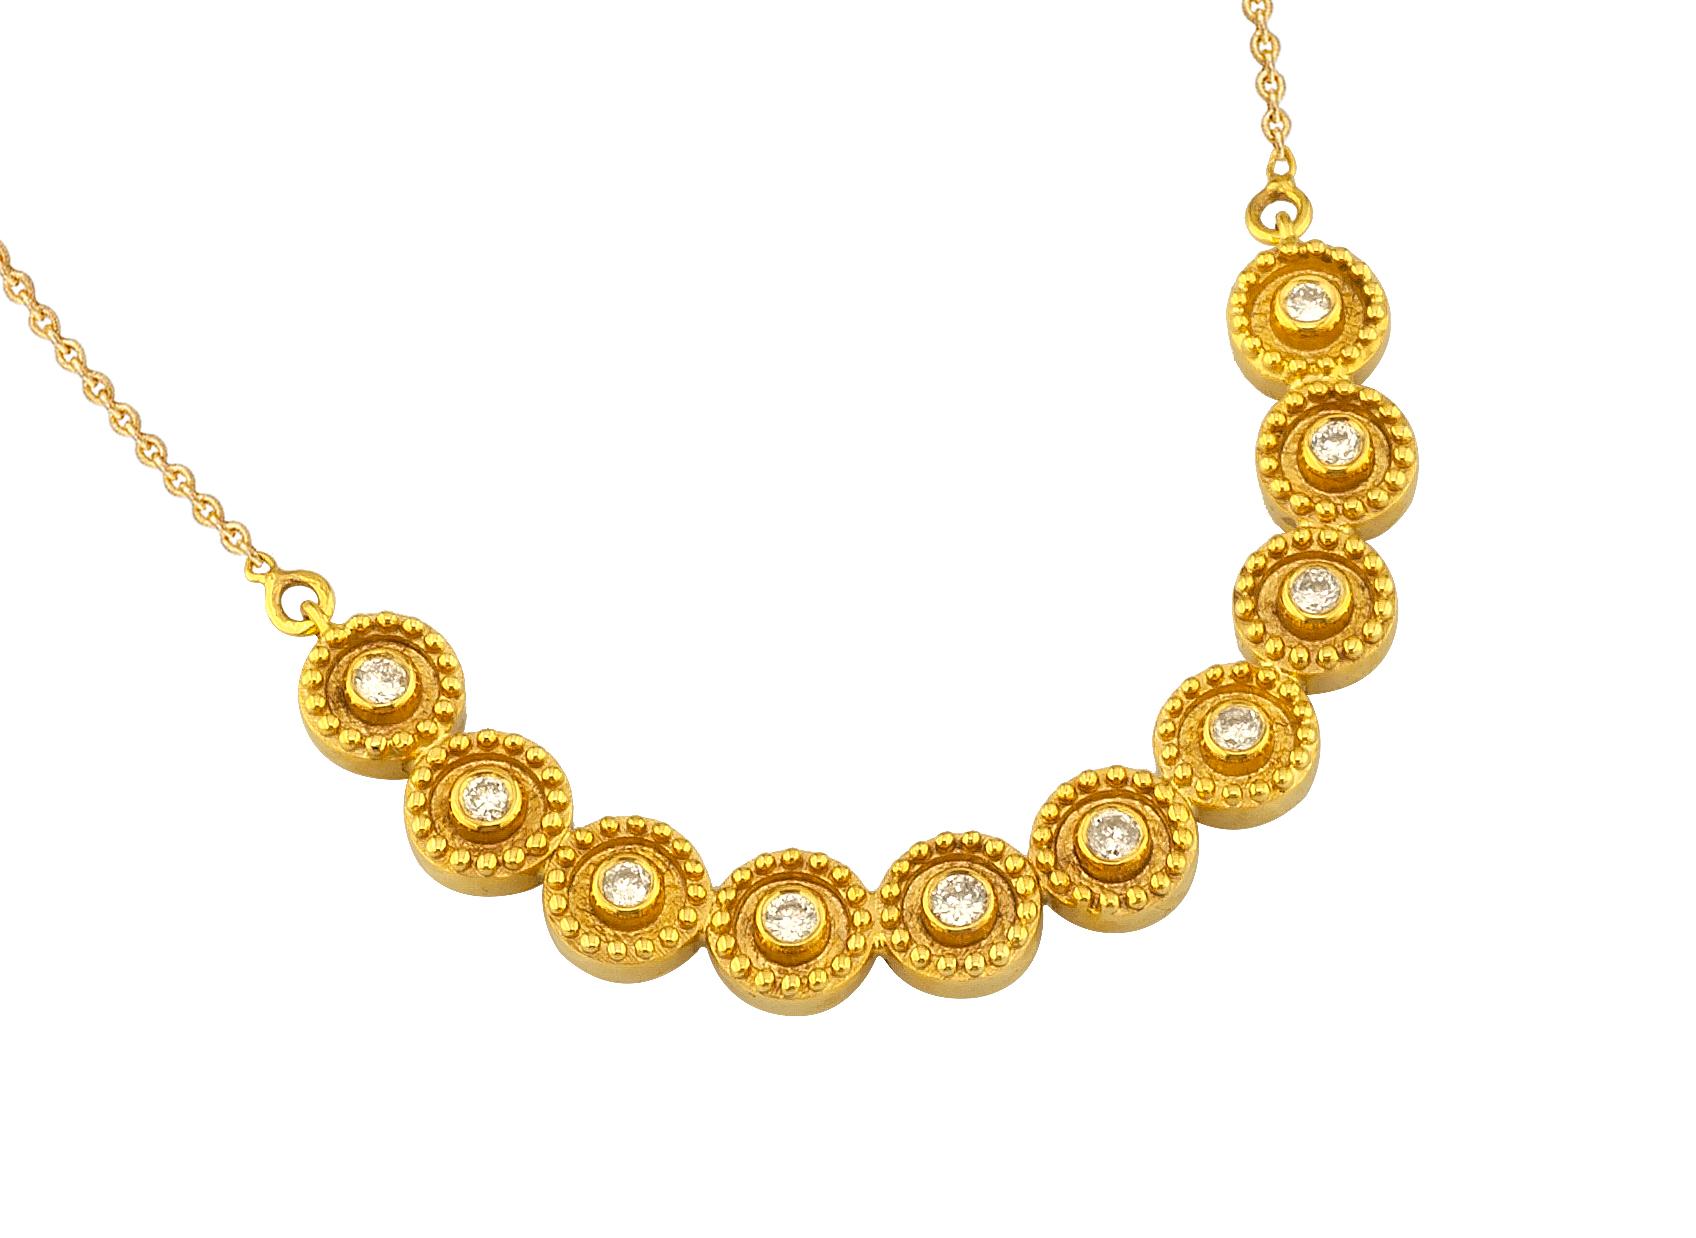 This S.Georgios designer chain necklace is 18 Karat yellow gold and microscopically decorated with hand-made bead granulation workmanship, and finished with a unique velvet background look. This beautiful everyday necklace features 10 brilliant-cut